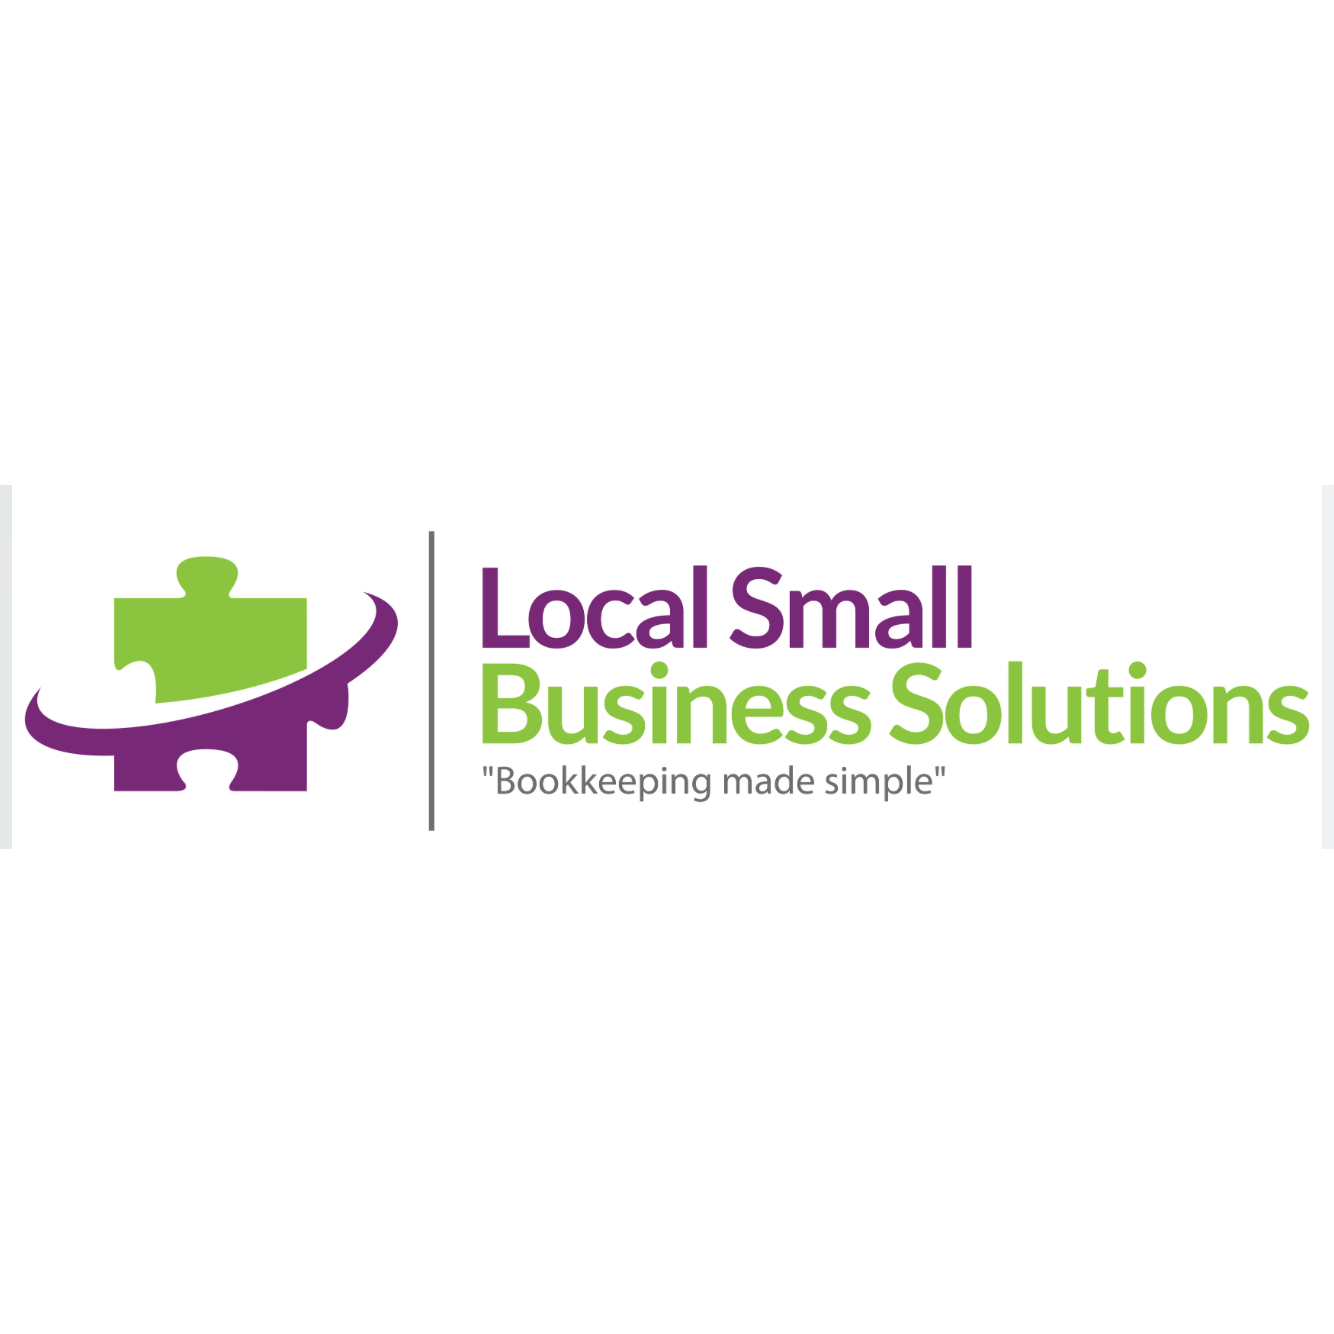 Local Small Business Solutions - Werribee, VIC 3030 - 0477 707 031 | ShowMeLocal.com